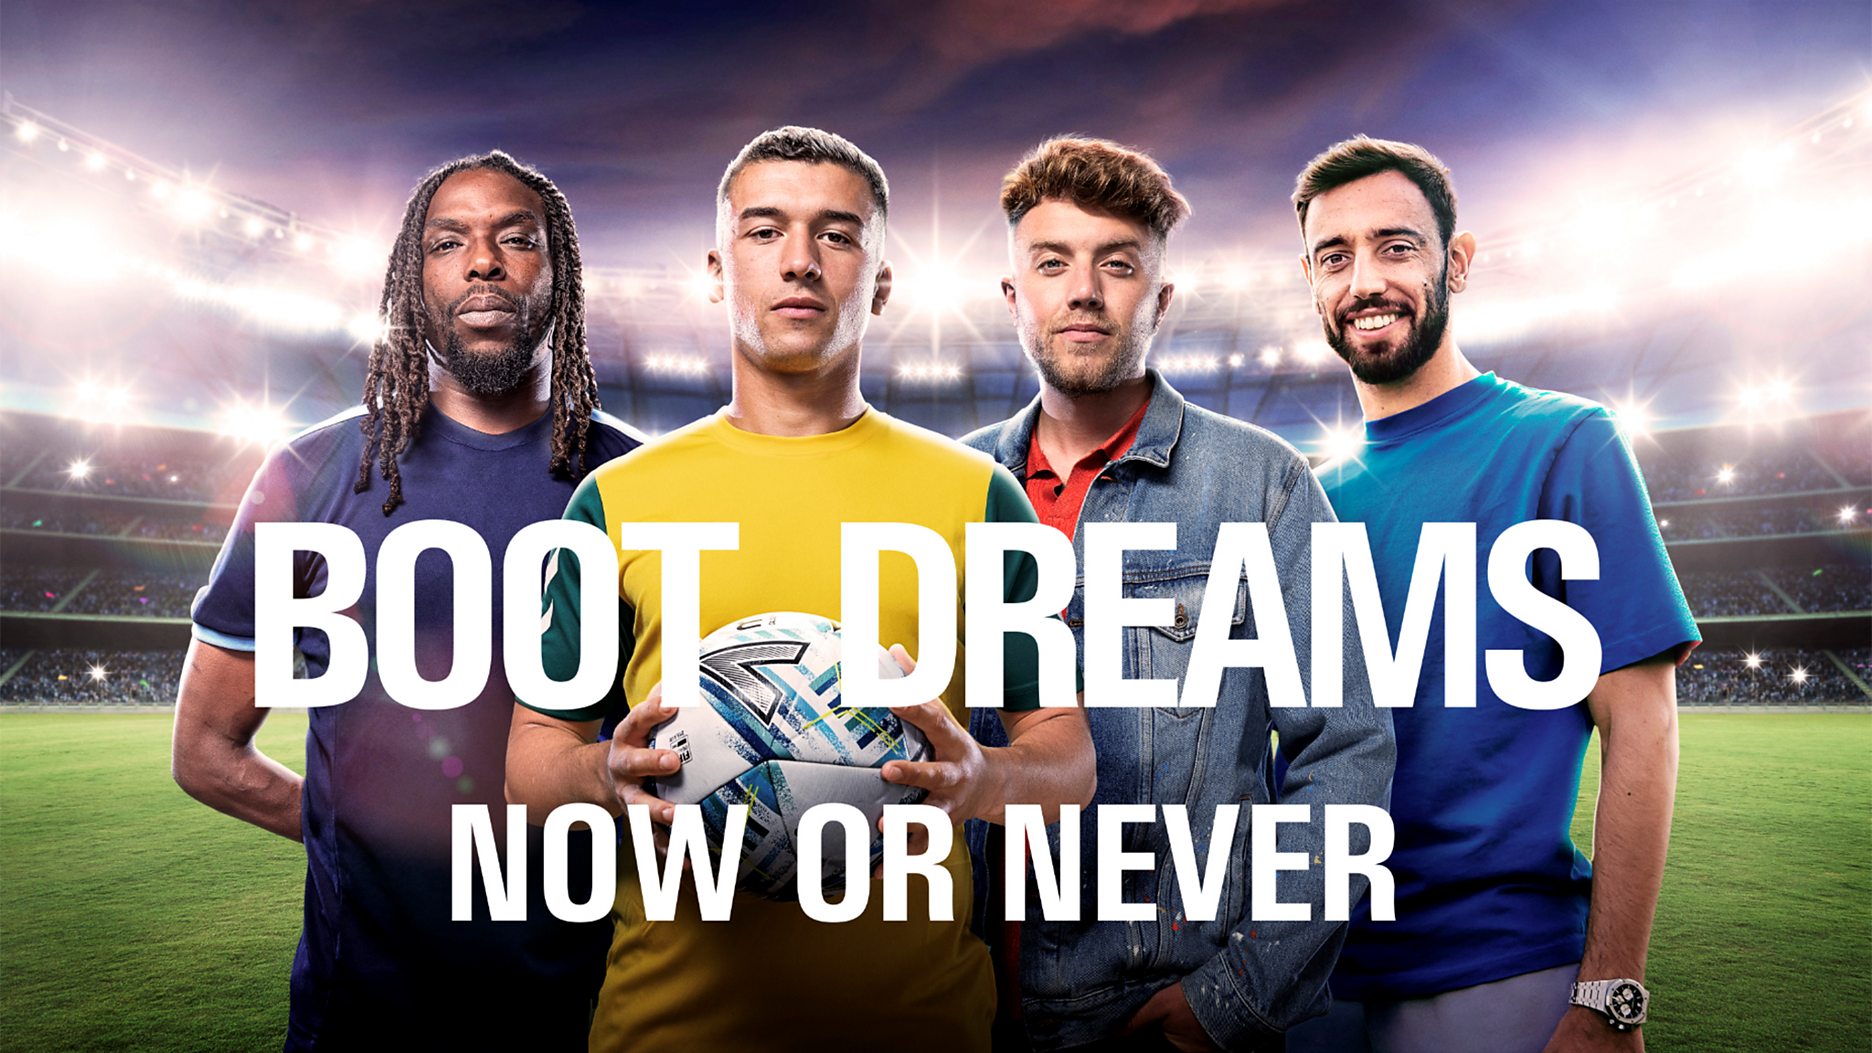 Available to Watch Now - Boot Dreams: Now or Never on BBC Three & BBC iPlayer